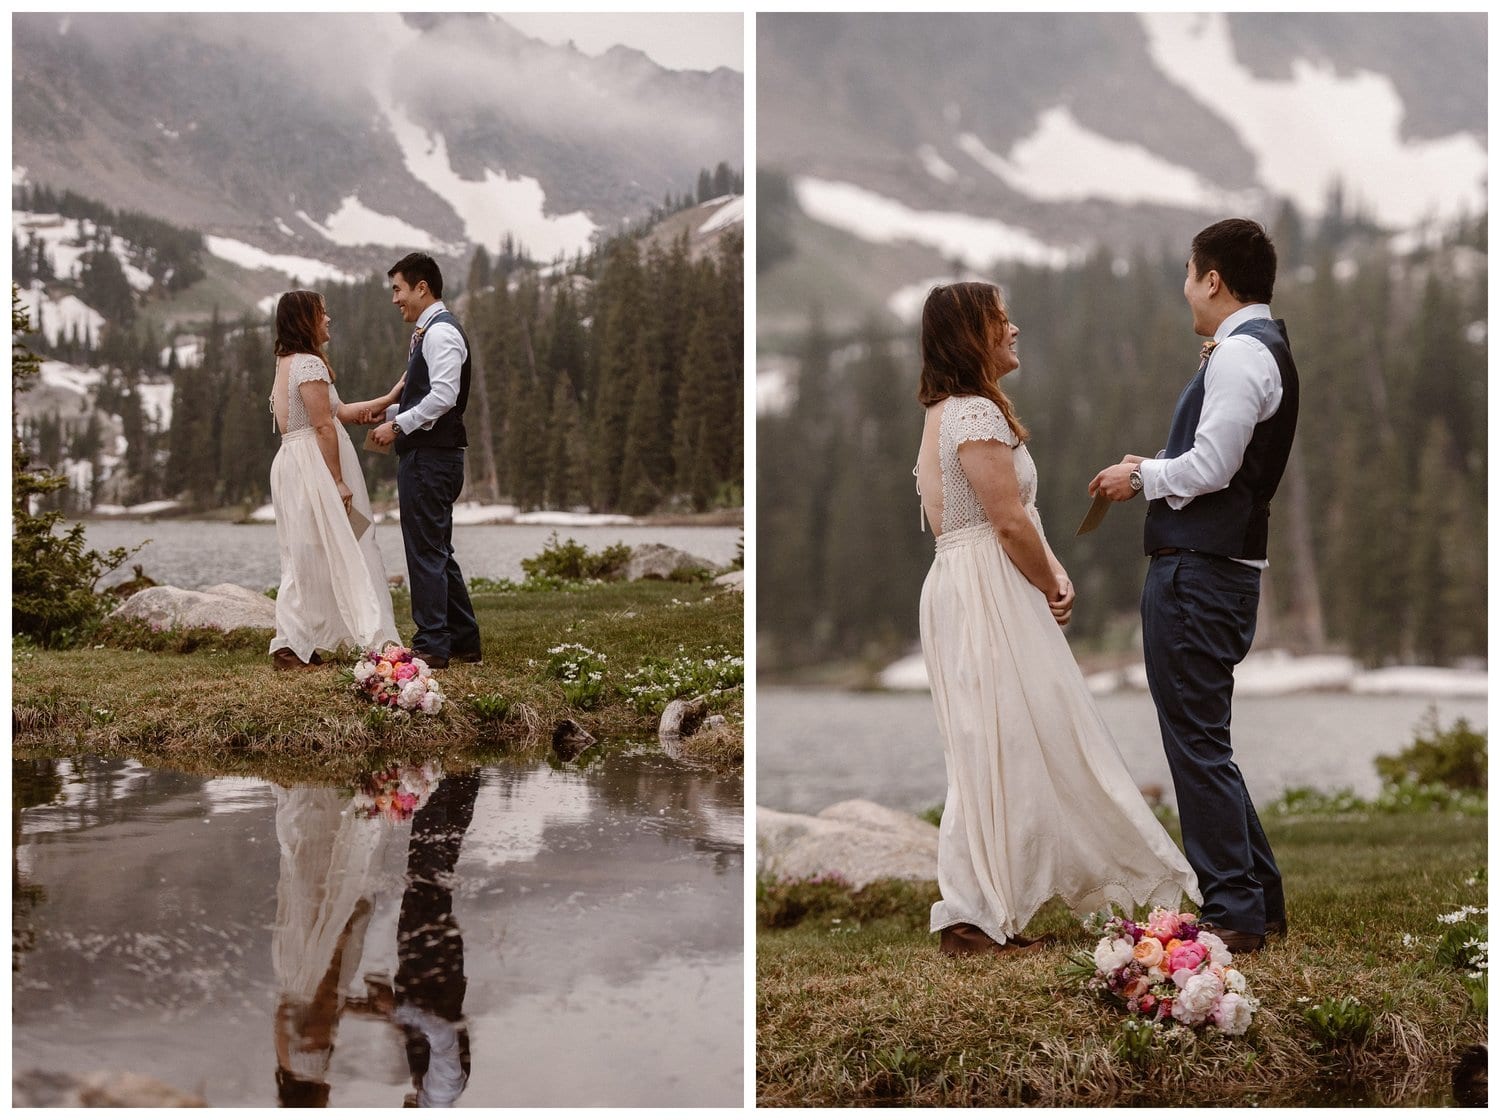 Bride and groom read their vows during intimate elopement ceremony near Boulder, Colorado. There is a high alpine lake in the background, a forest, and snow-capped mountains. 